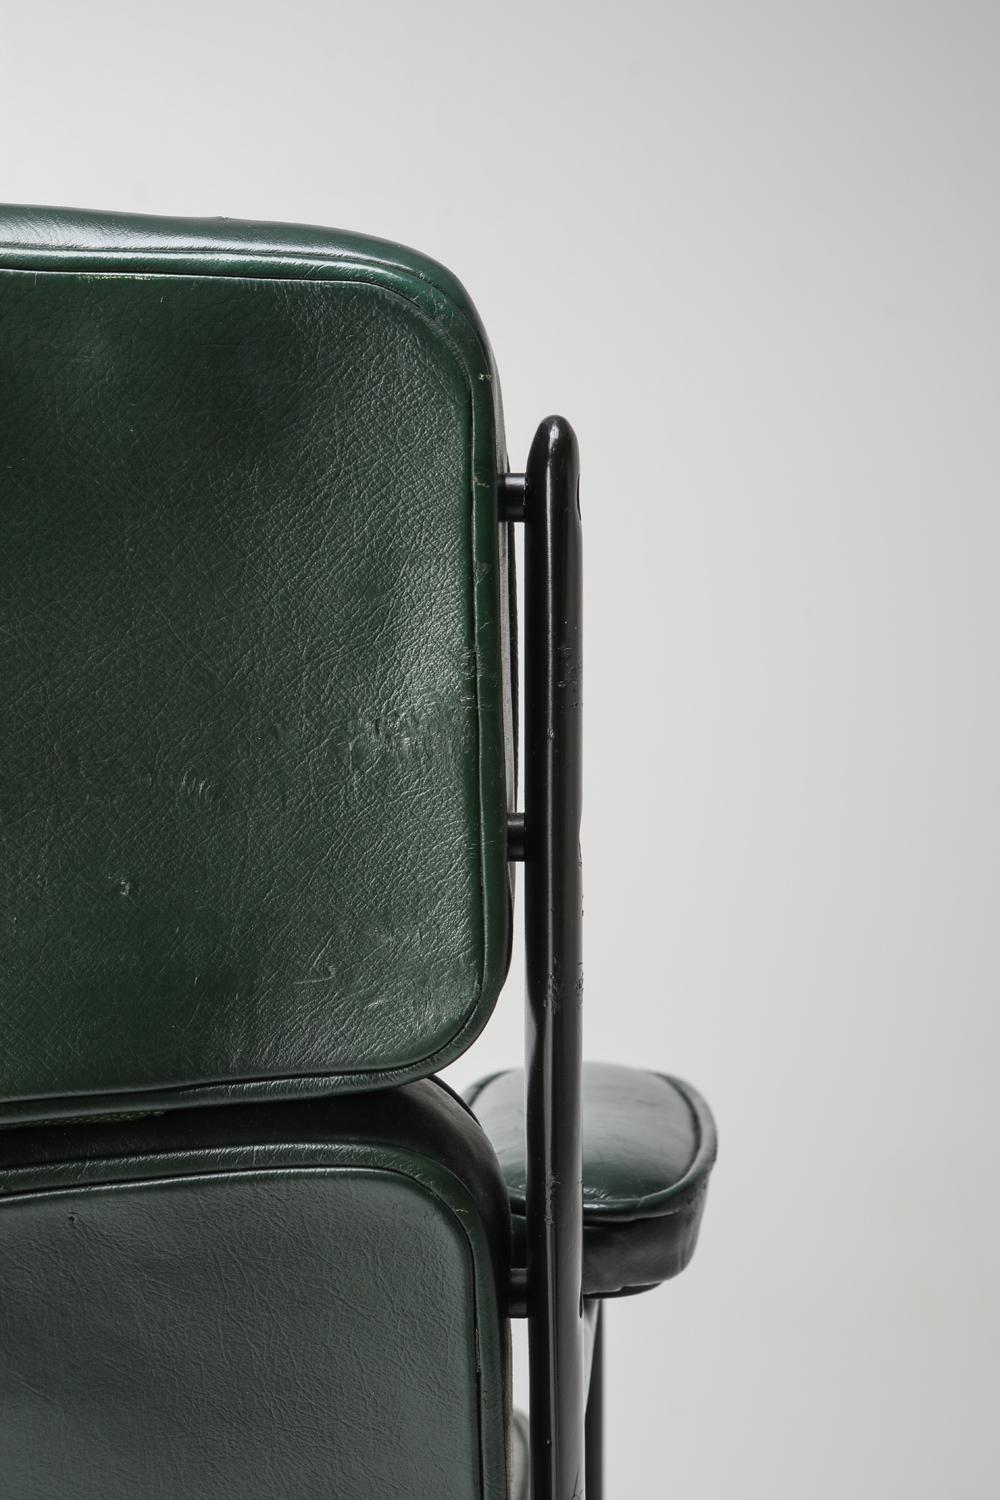 Eames Time Life Lobby Chair EA108 in Green Leather 3